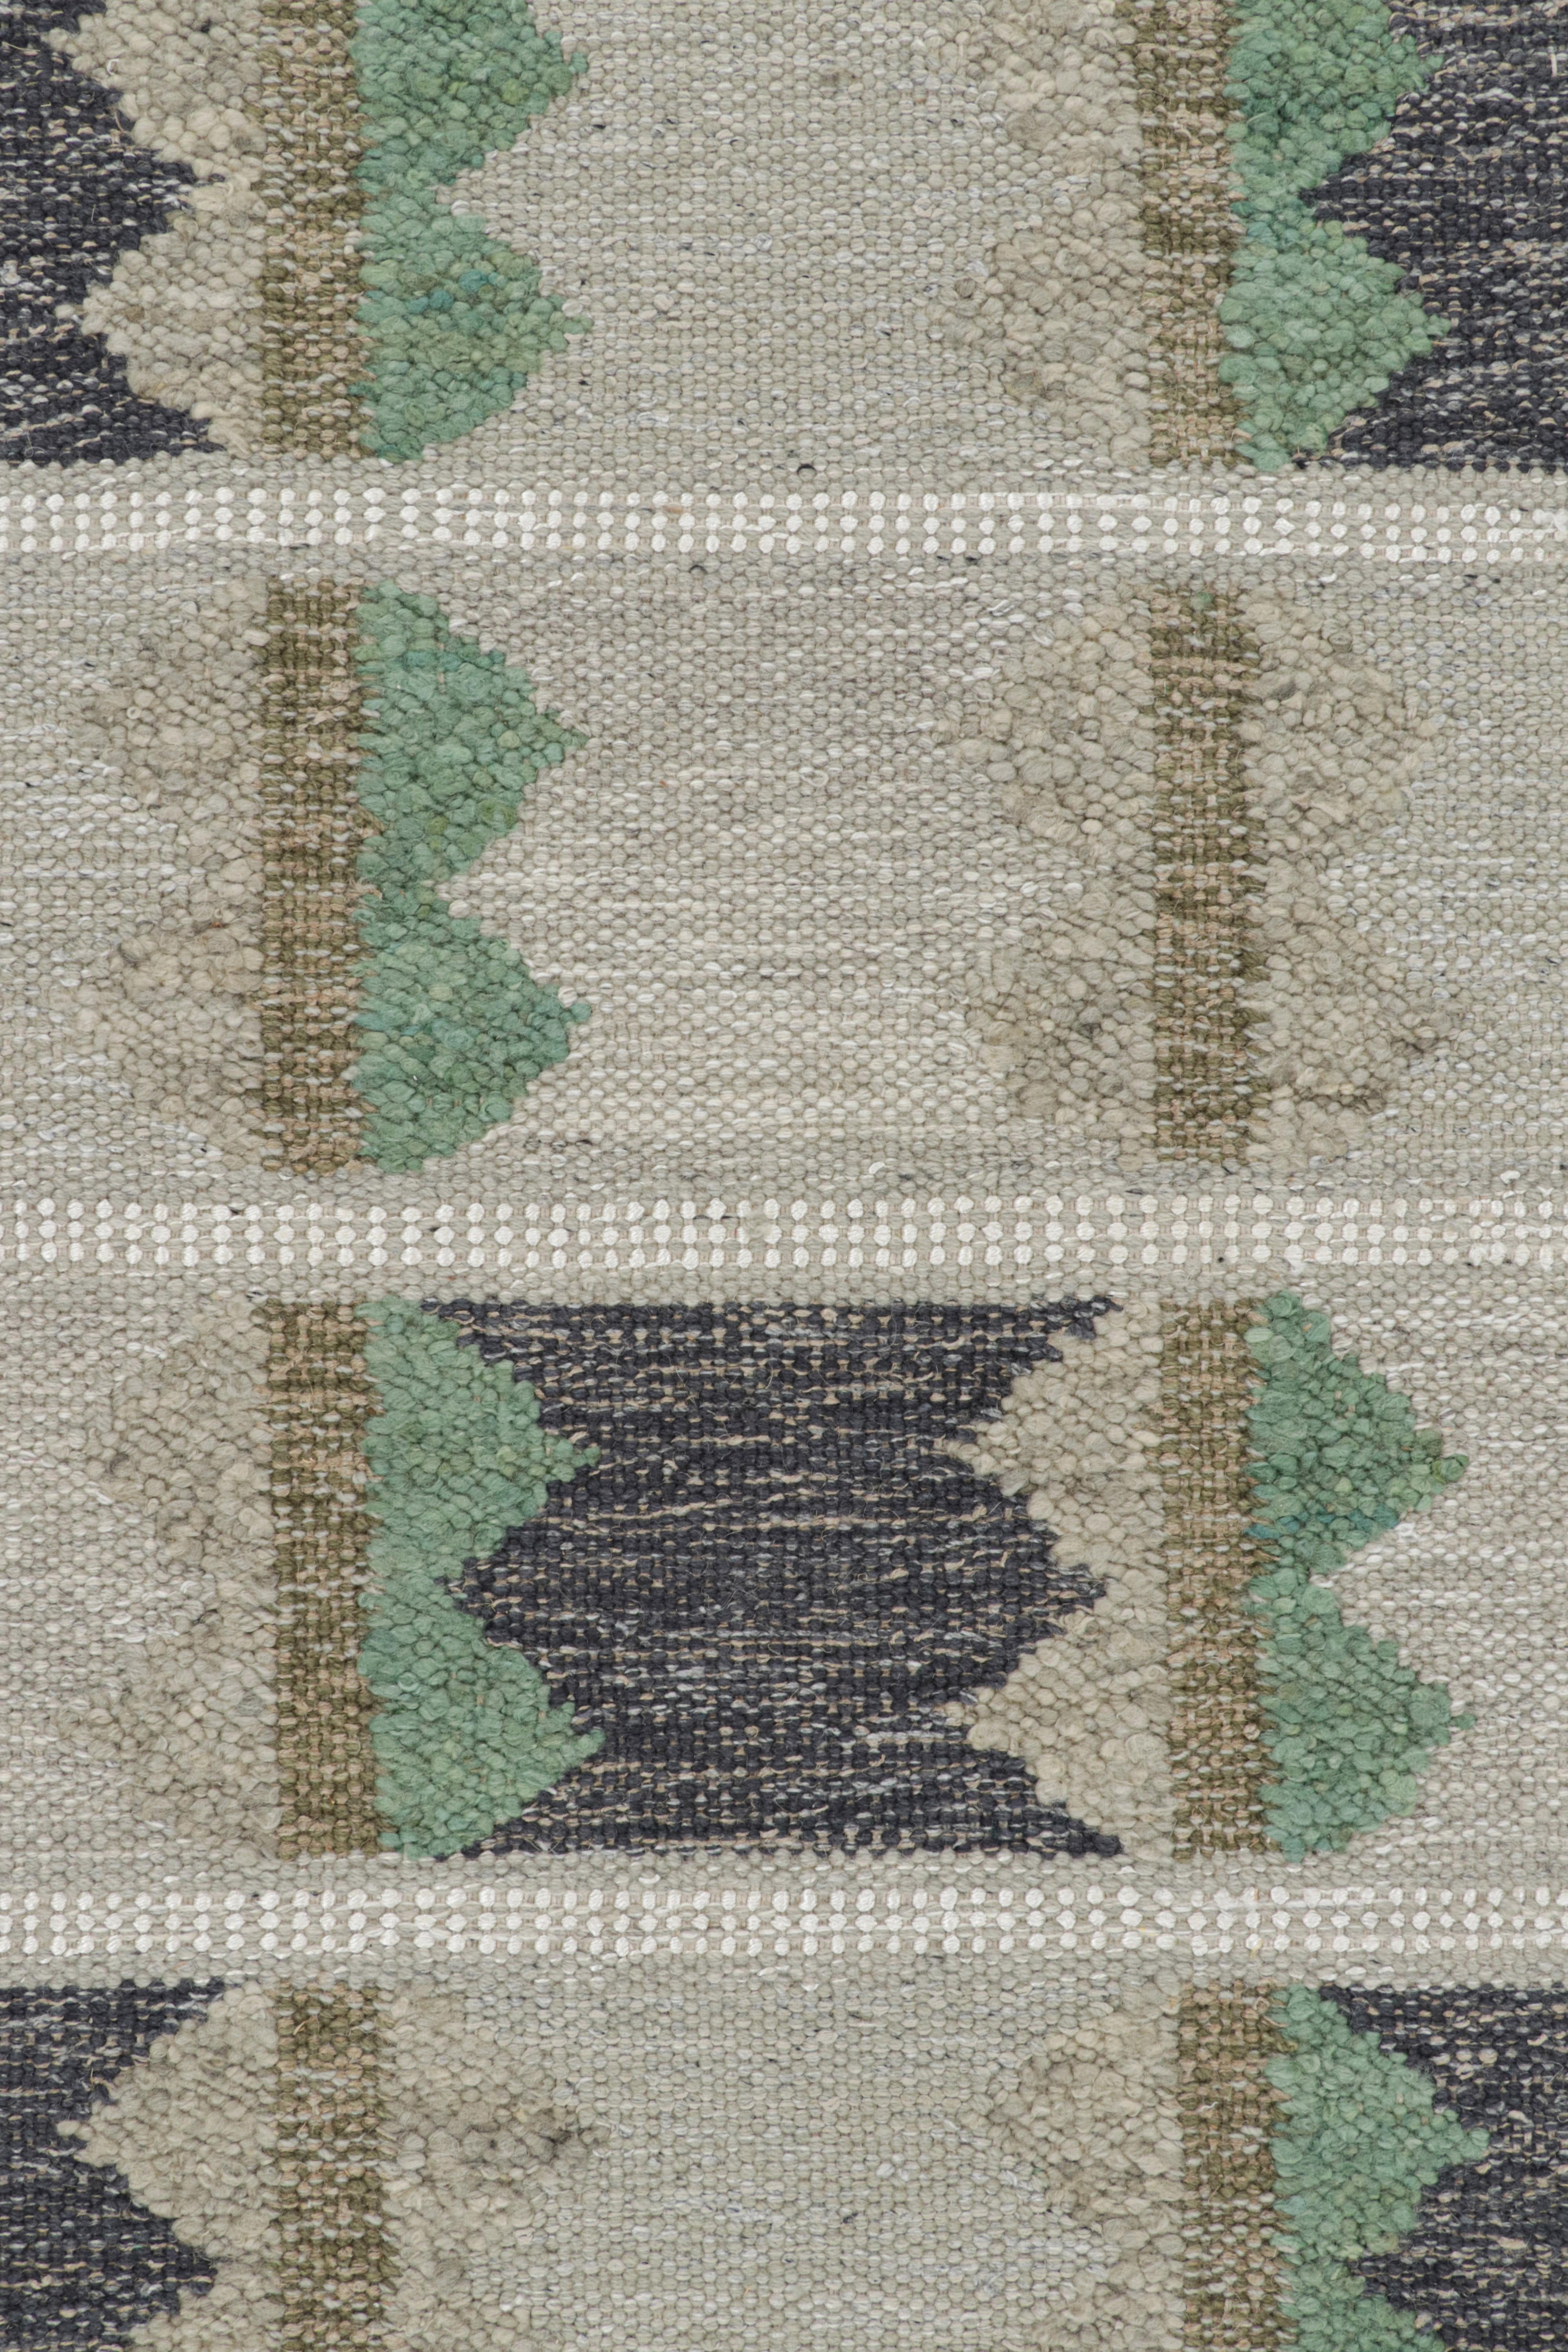 Modern Rug & Kilim’s Scandinavian Style Rug with Geometric Patterns in Tones of Green For Sale